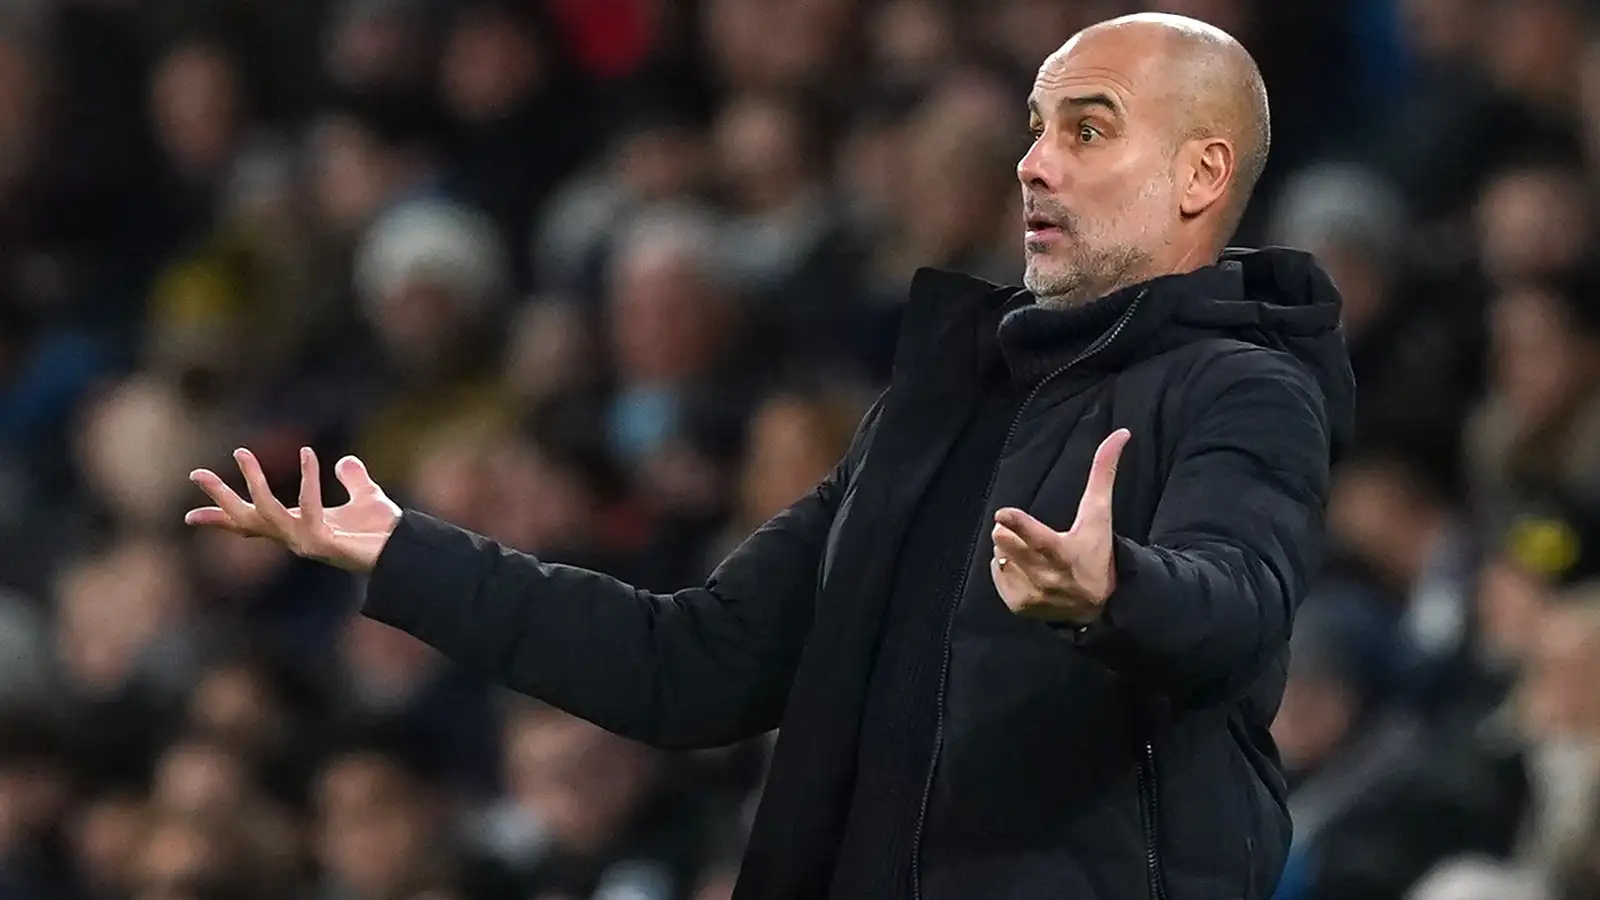 Pep Guardiola urges on his Manchester City team during the win over Tottenham.